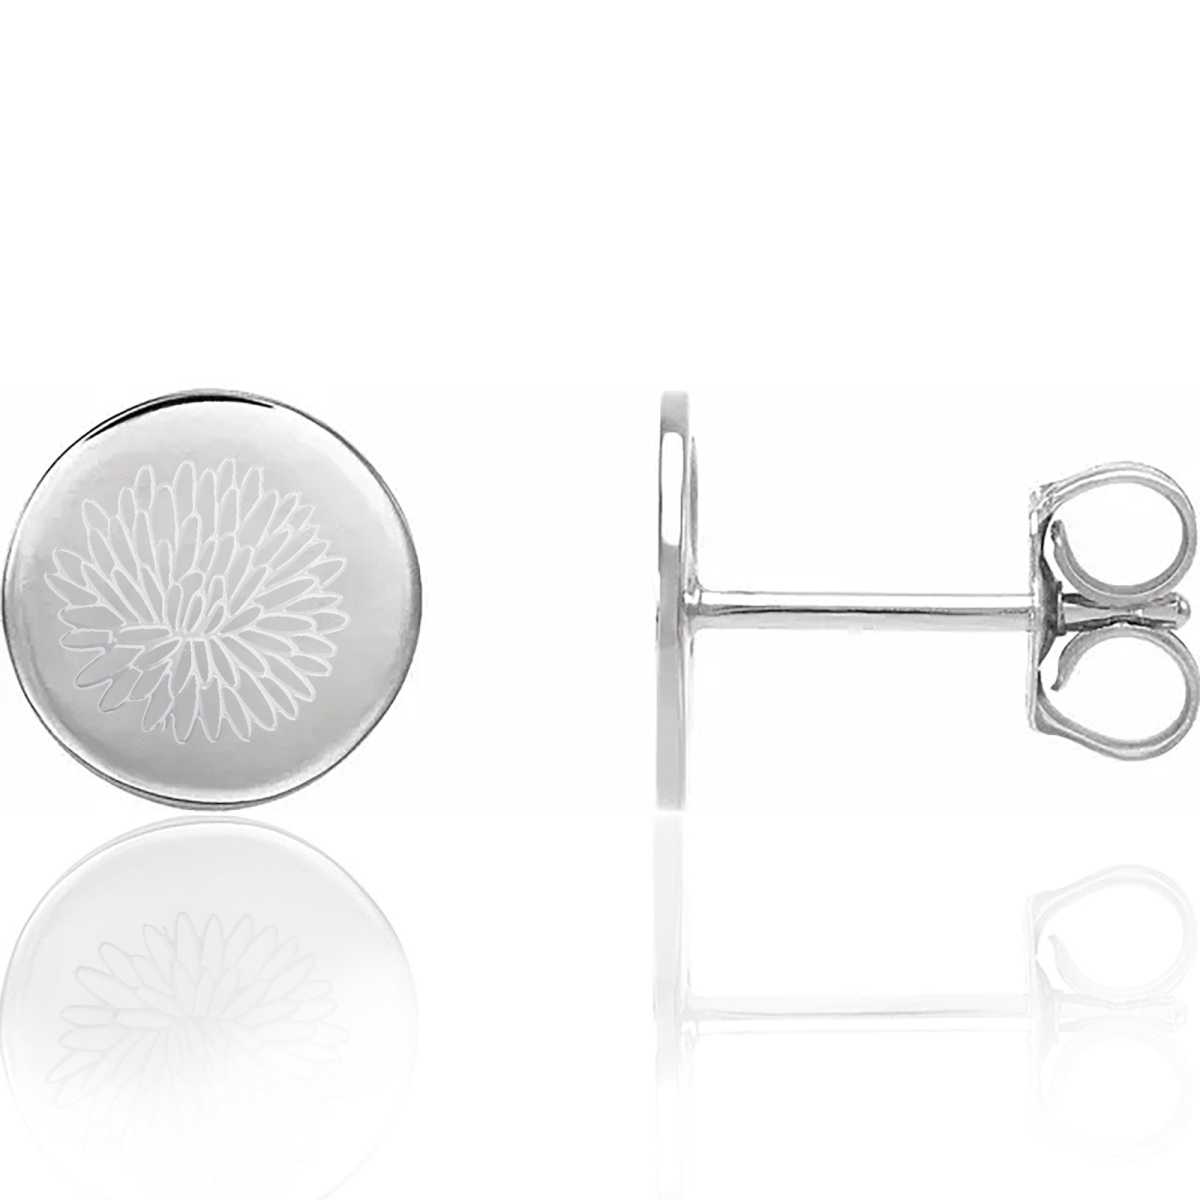 Birth Flower Stud Earrings- | Mali's Fashion Jewelry  Mali's  9  Metal Part: Sterling Silver  - Birth Month Flower and blossom e